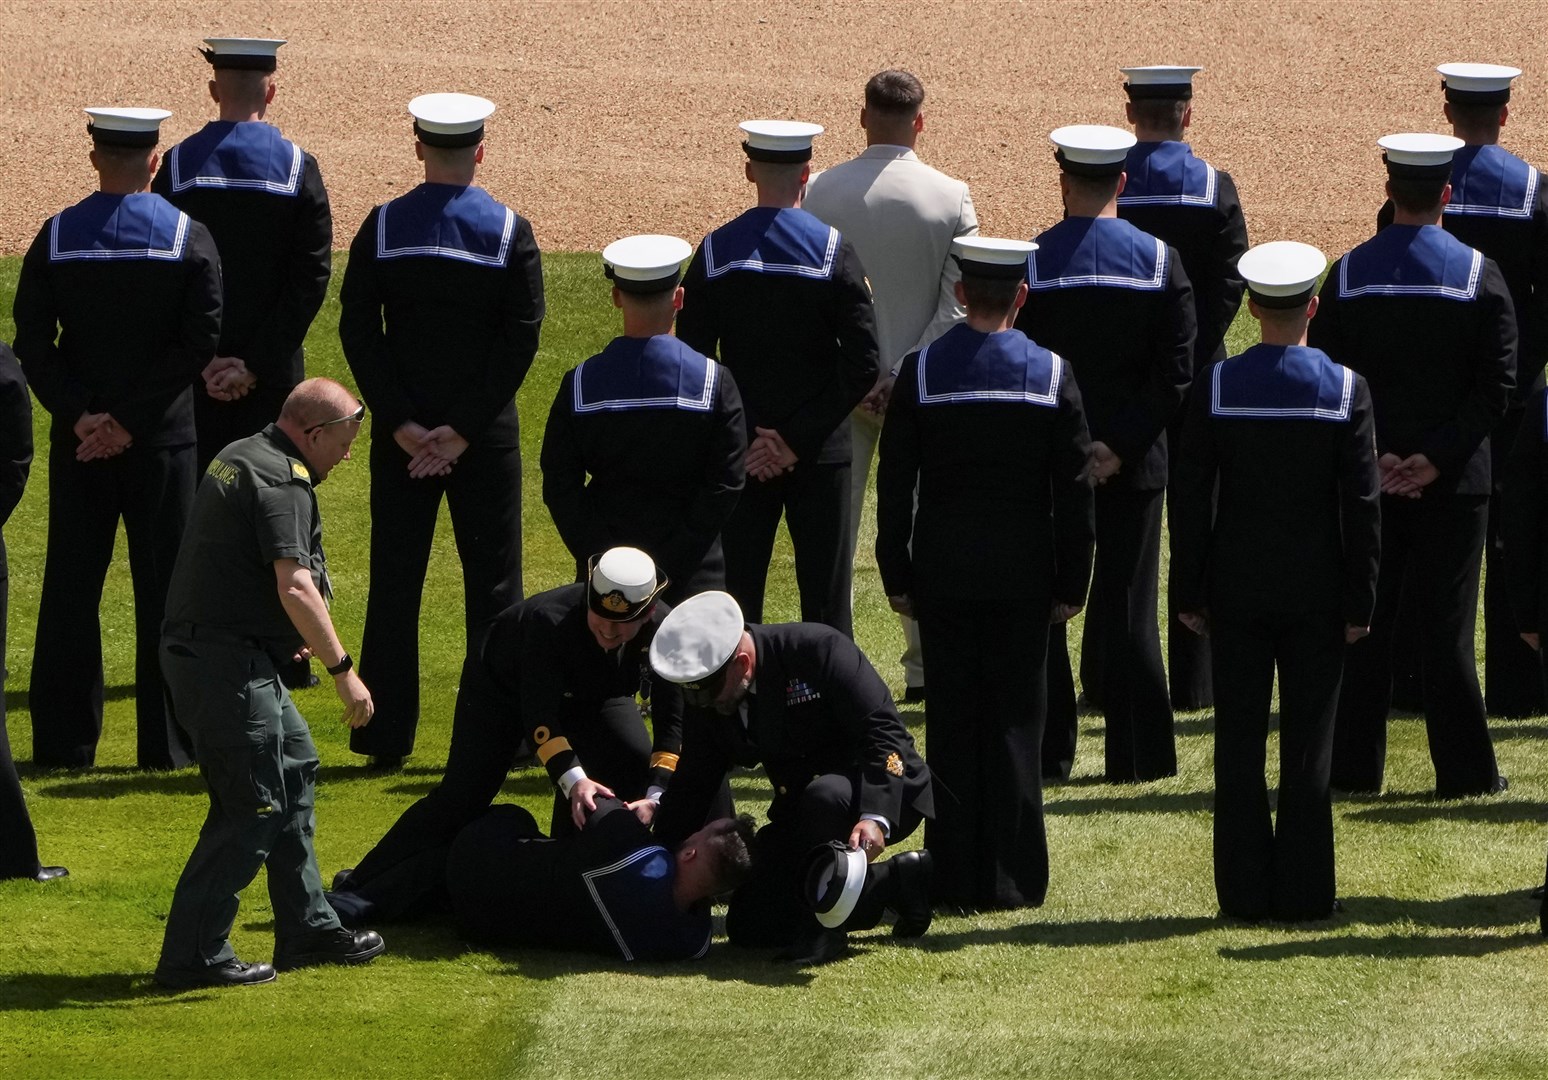 A member of Royal Navy who collapsed is attended to during the ceremony (Maja Smiejkowska/PA)